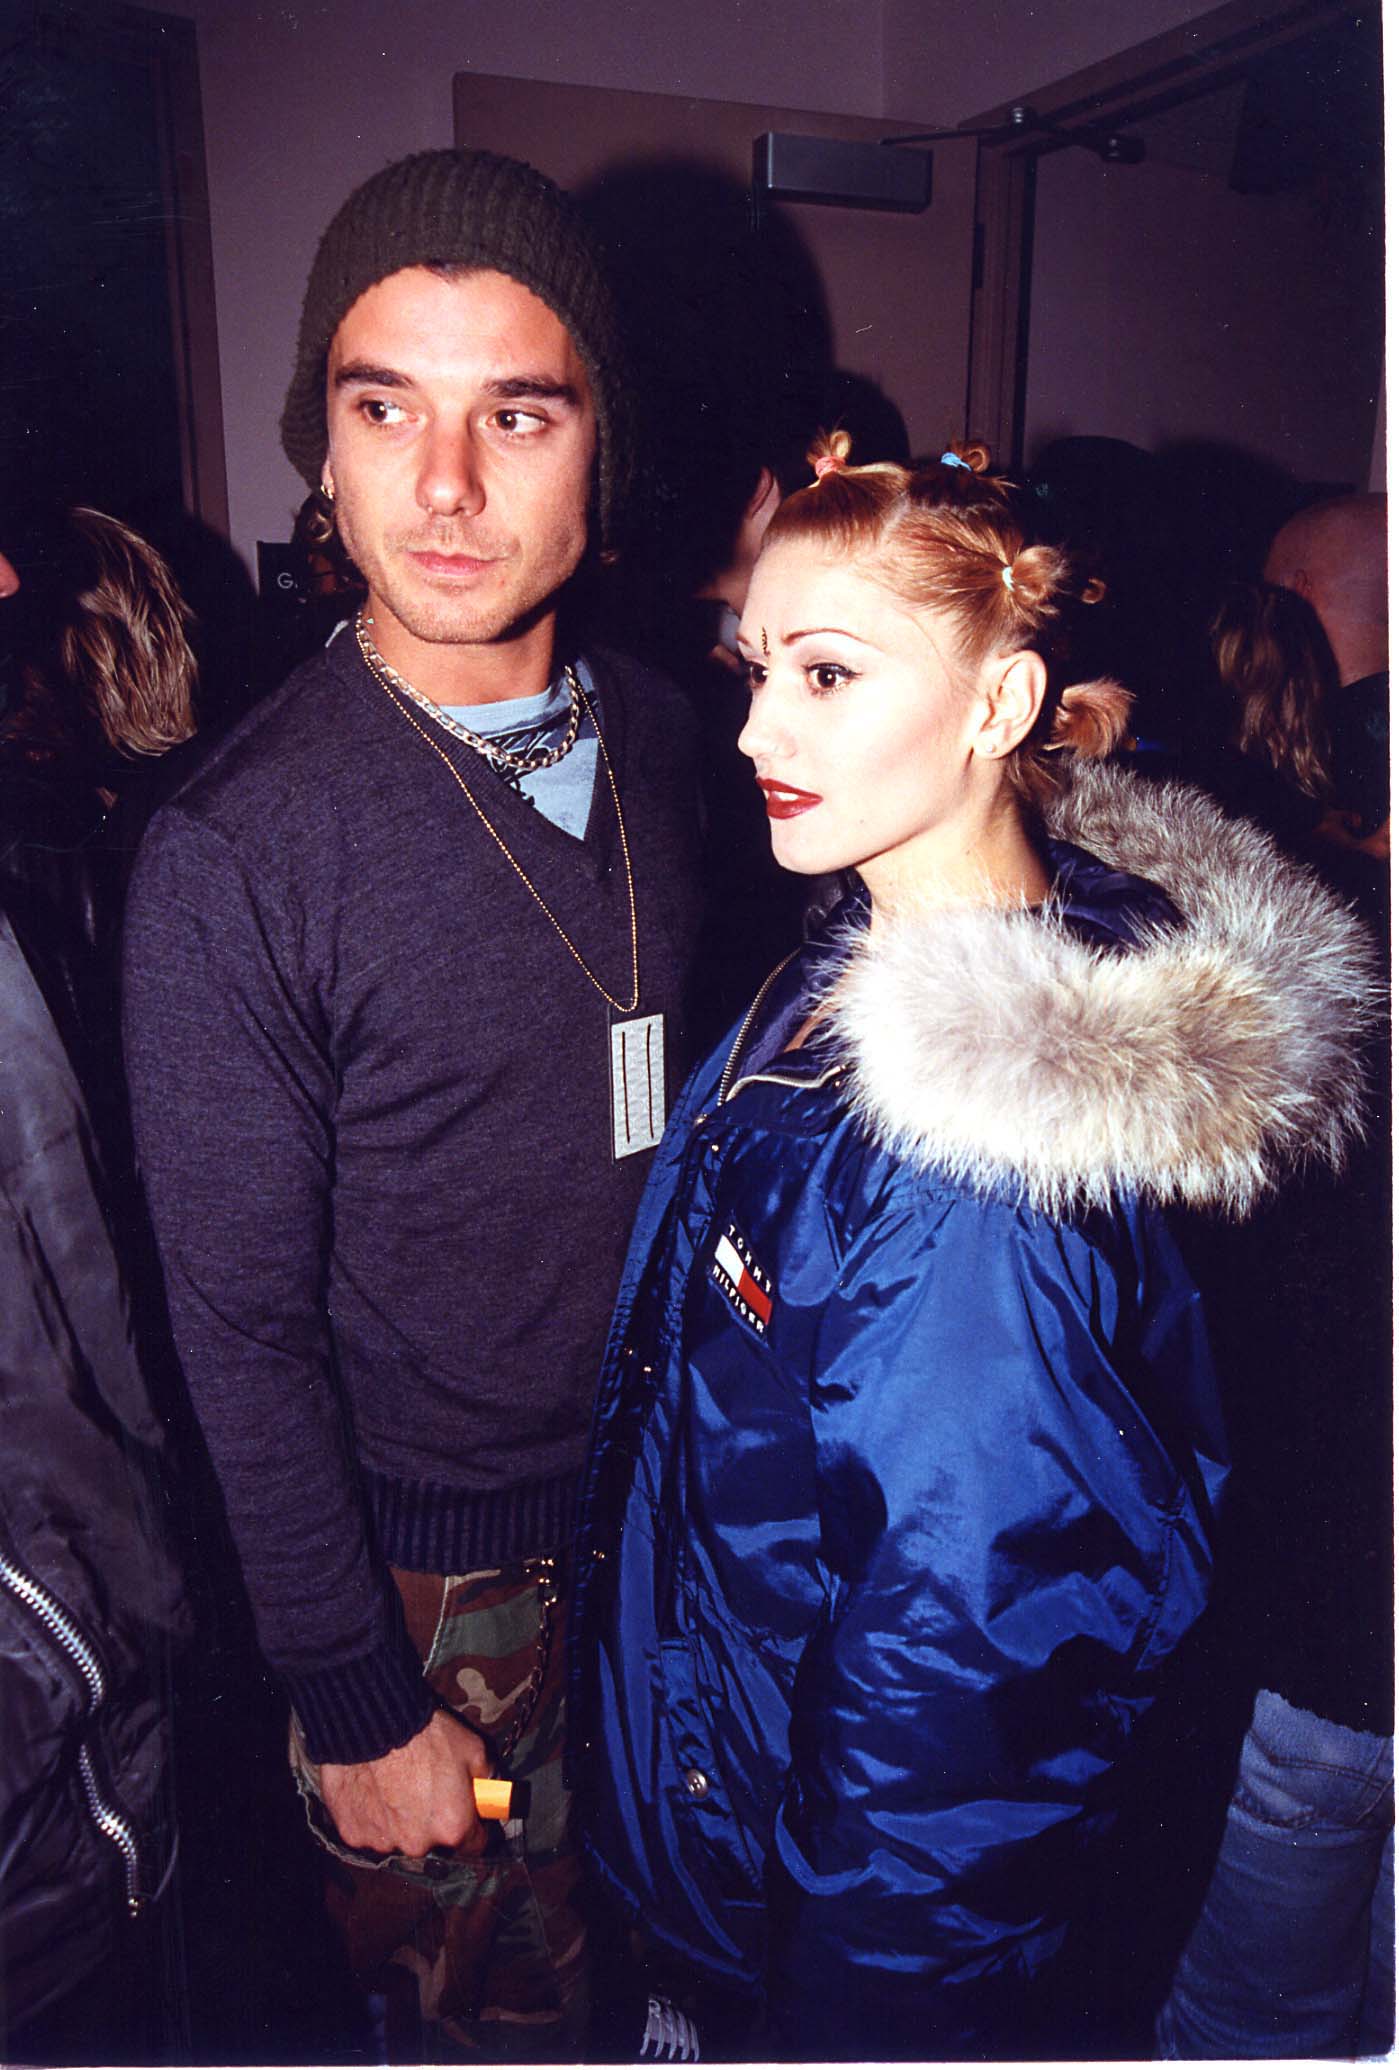 Gavin Rossdale and Gwen Stefani pictured during the 1997 KROQ Acoustic X-Mas event in Los Angeles, California | Source: Getty Images